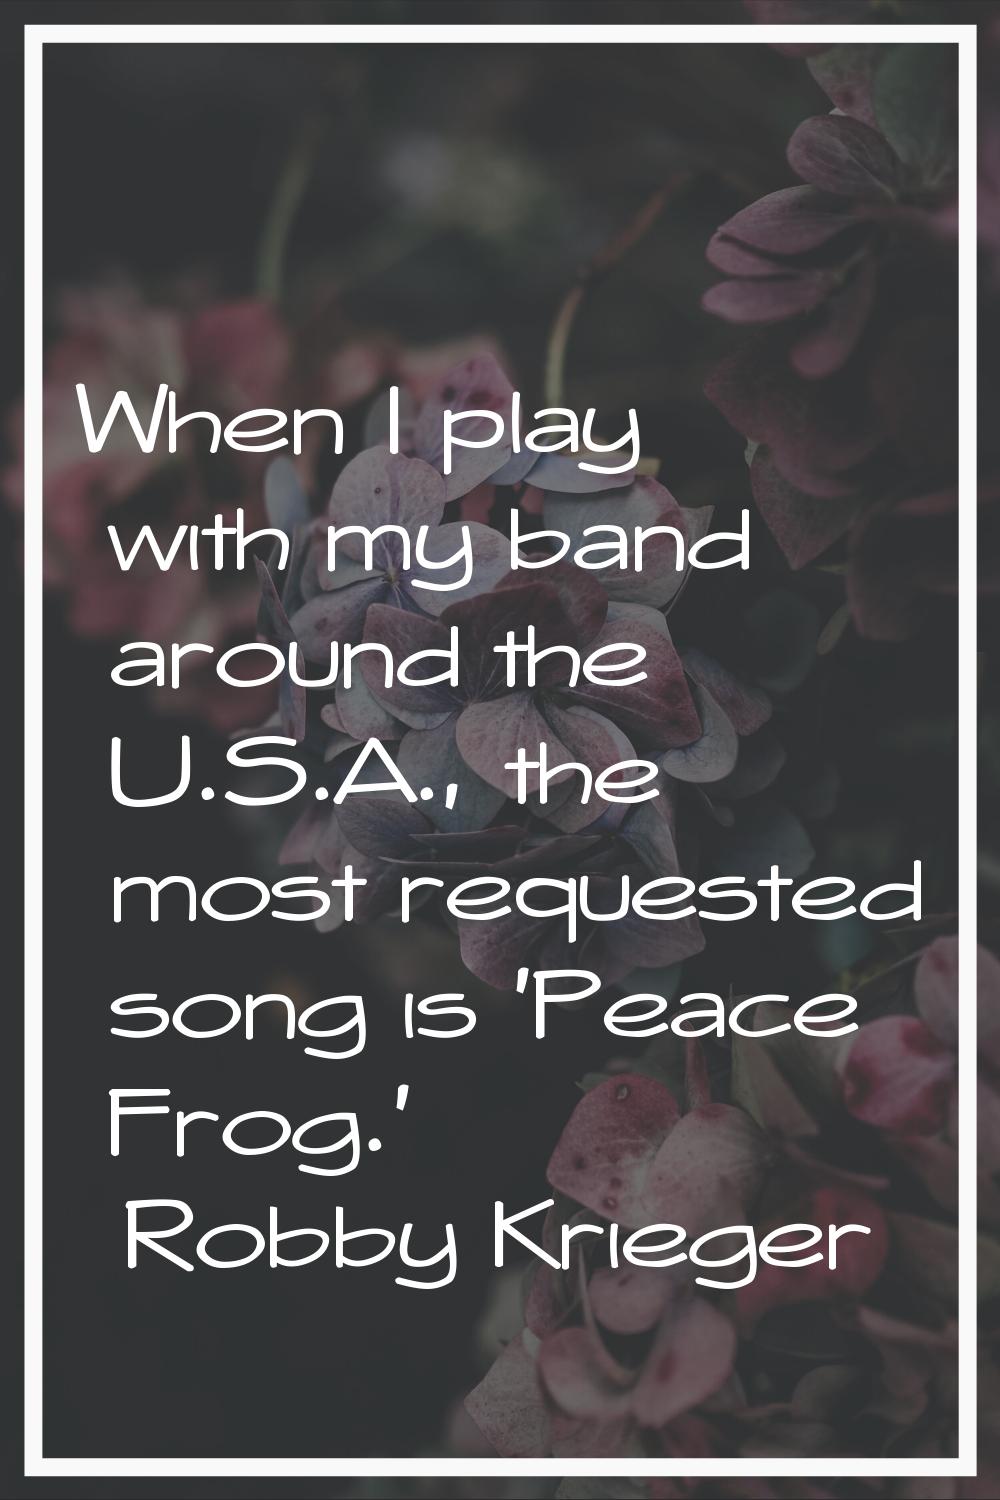 When I play with my band around the U.S.A., the most requested song is 'Peace Frog.'